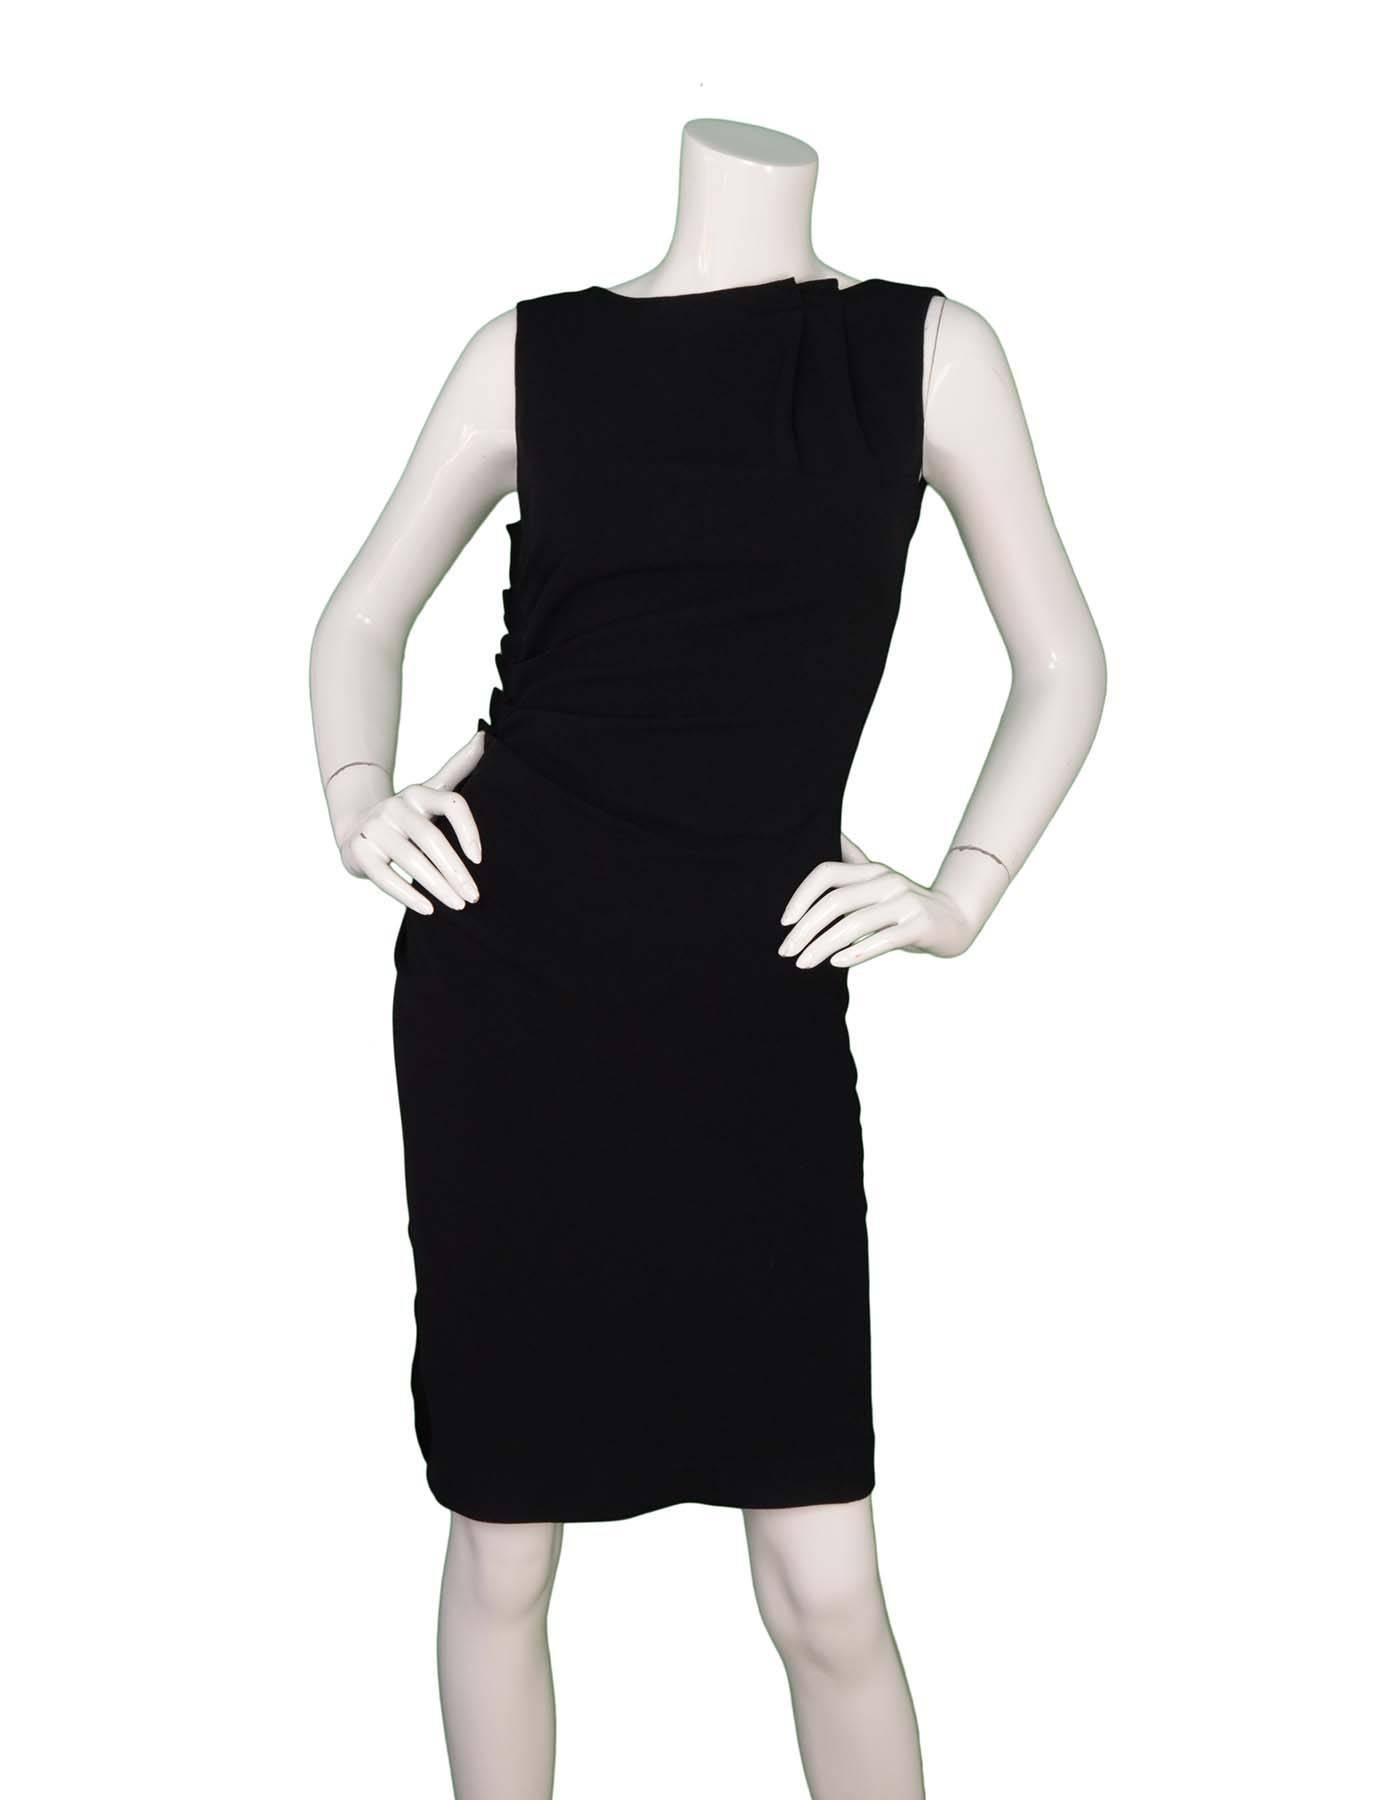 Christian Dior Black Sleeveless Ruched Dress sz 6
Features ruched detailing at neckline and at right side seam
Made In: Italy
Color: Black
Composition: 57% Acetate and 43% viscose
Lining: 100% Silk
Closure/Opening: Back zipper closure